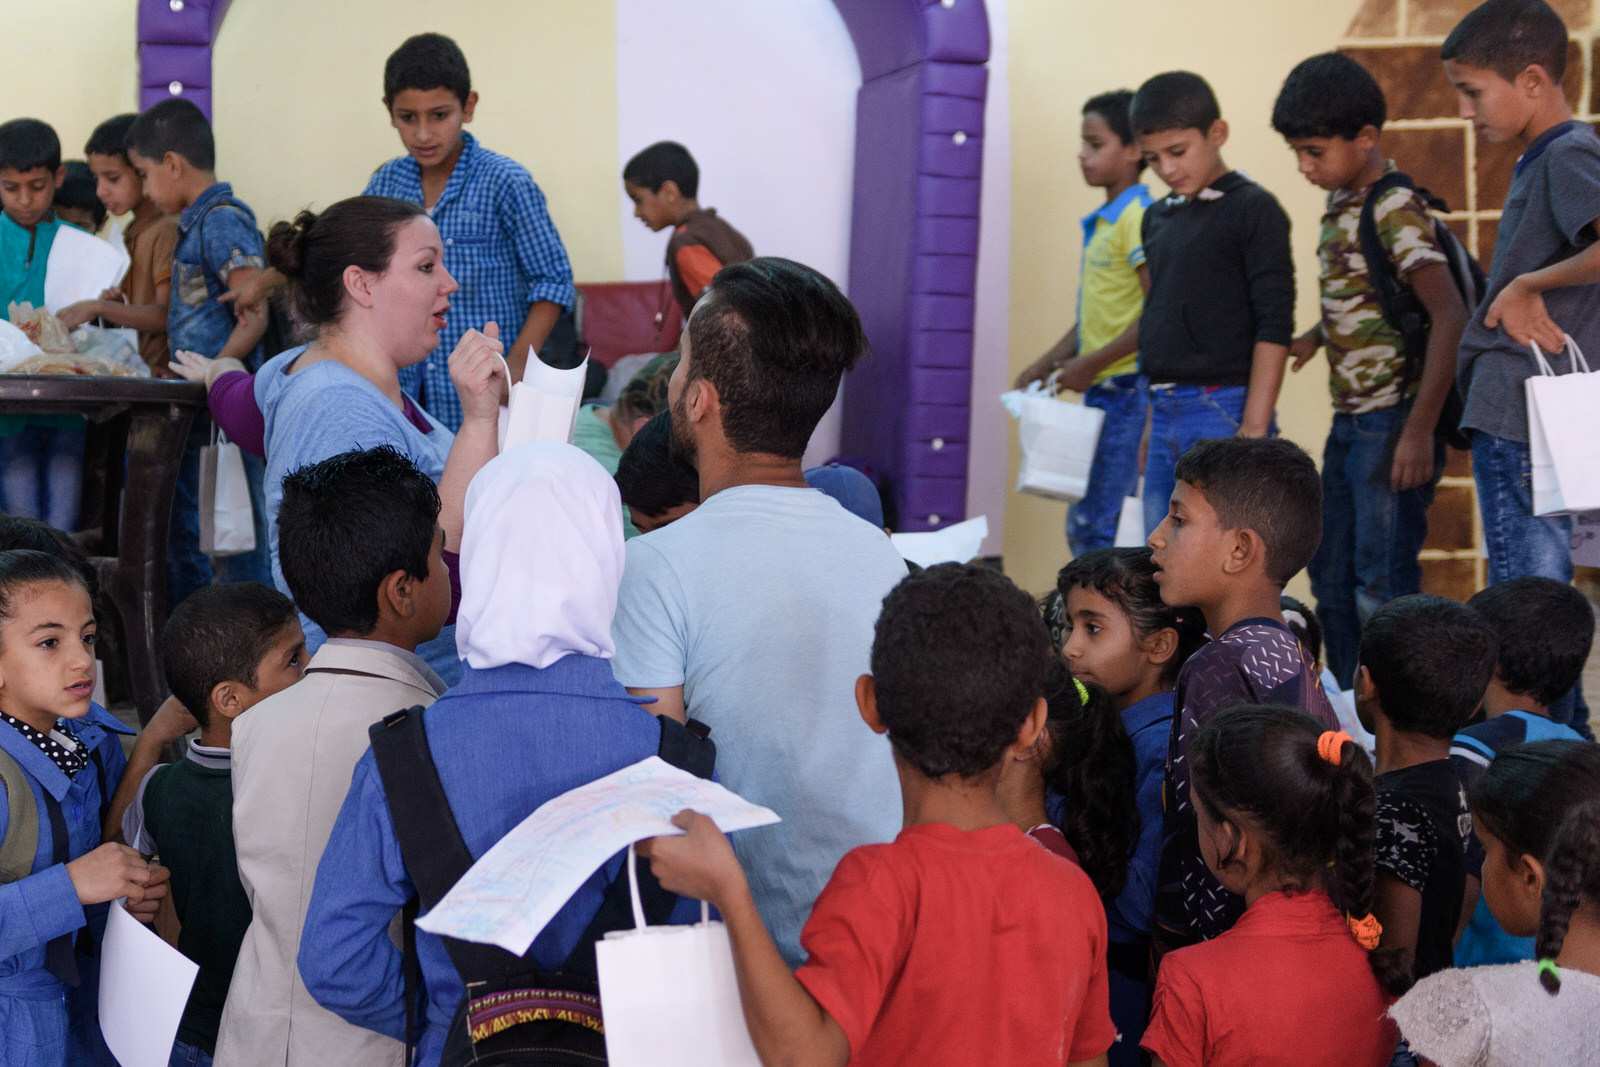 Chelsea and Mahmud distribute bags to eager children from Jerash refugee camp.